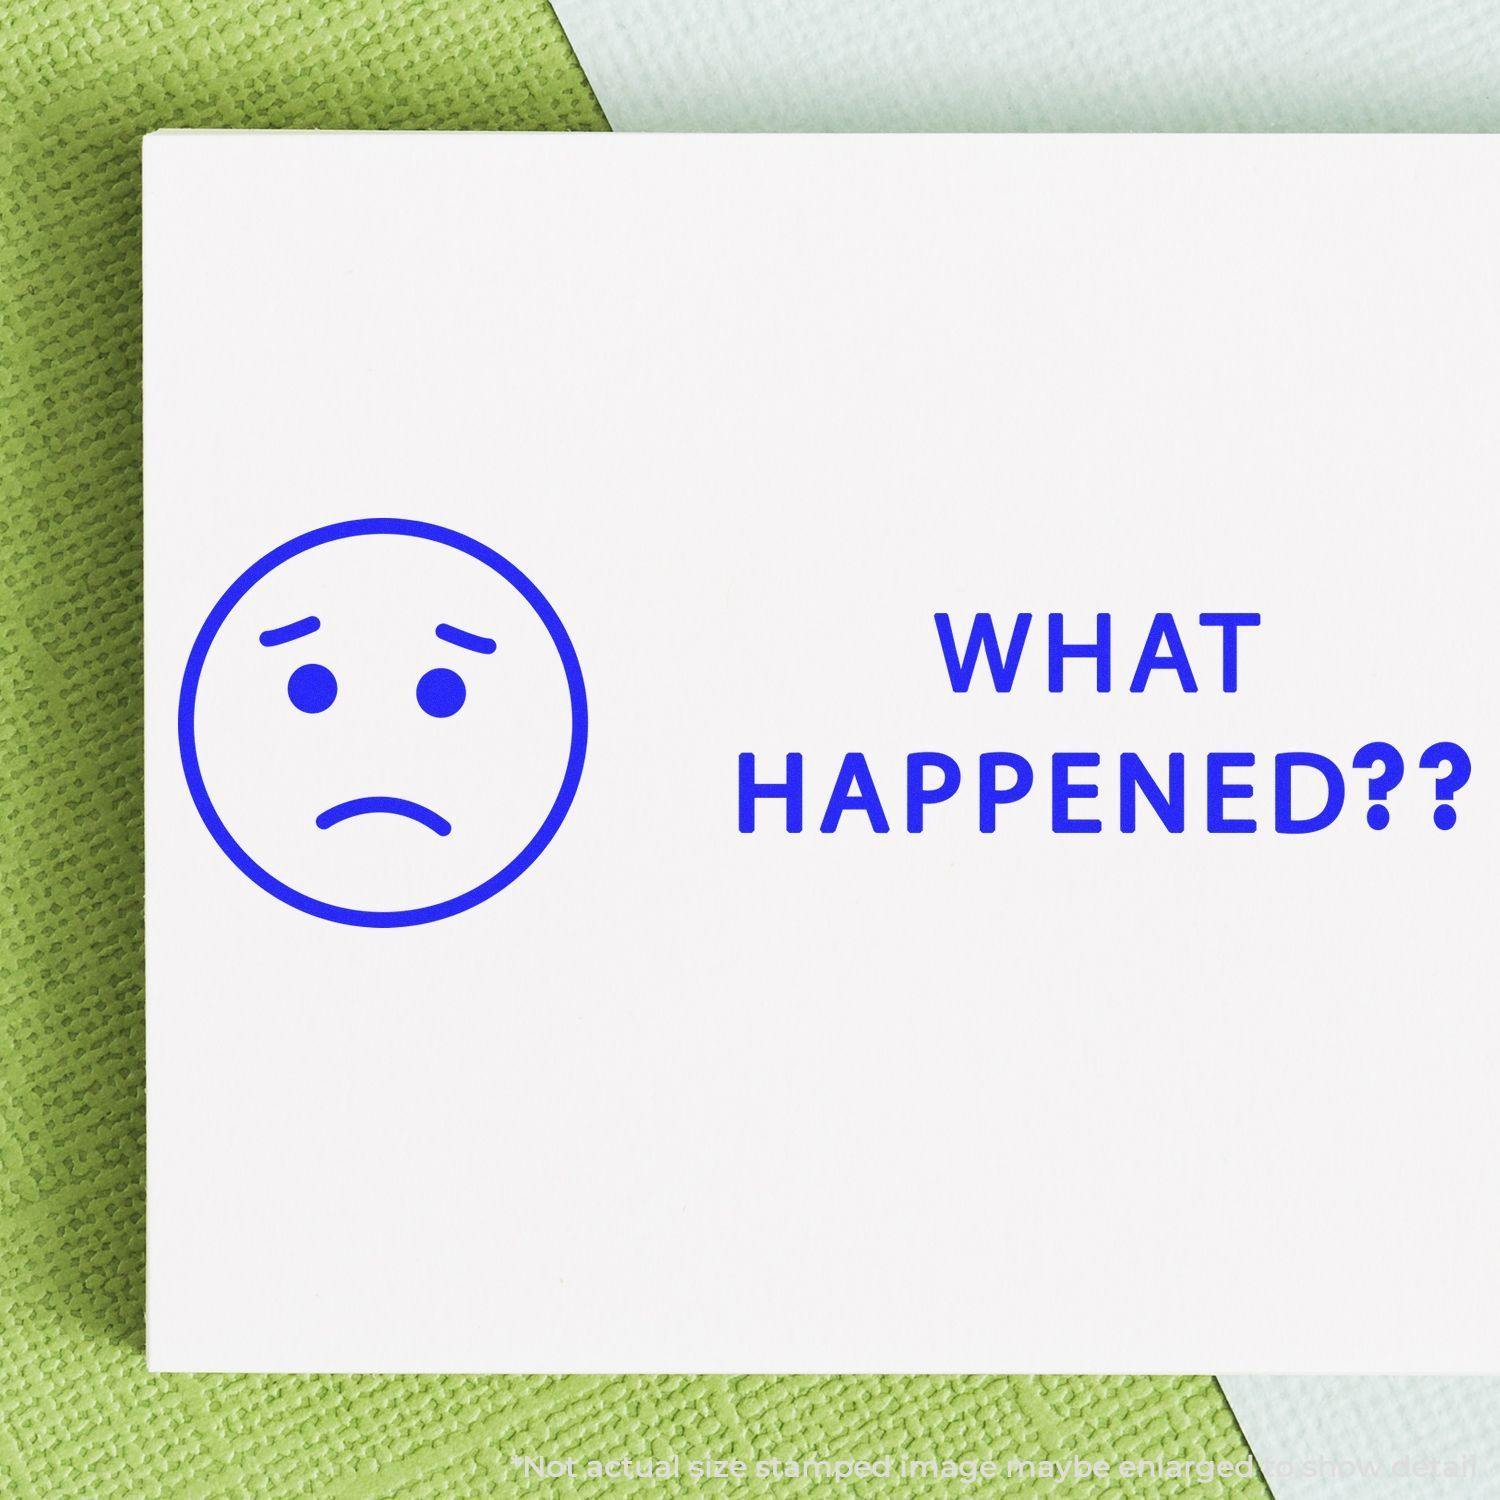 A stock office rubber stamp with a stamped image showing how the text "WHAT HAPPENED??" in a large bold font with an image of a sad face emoji on the left side is displayed after stamping.